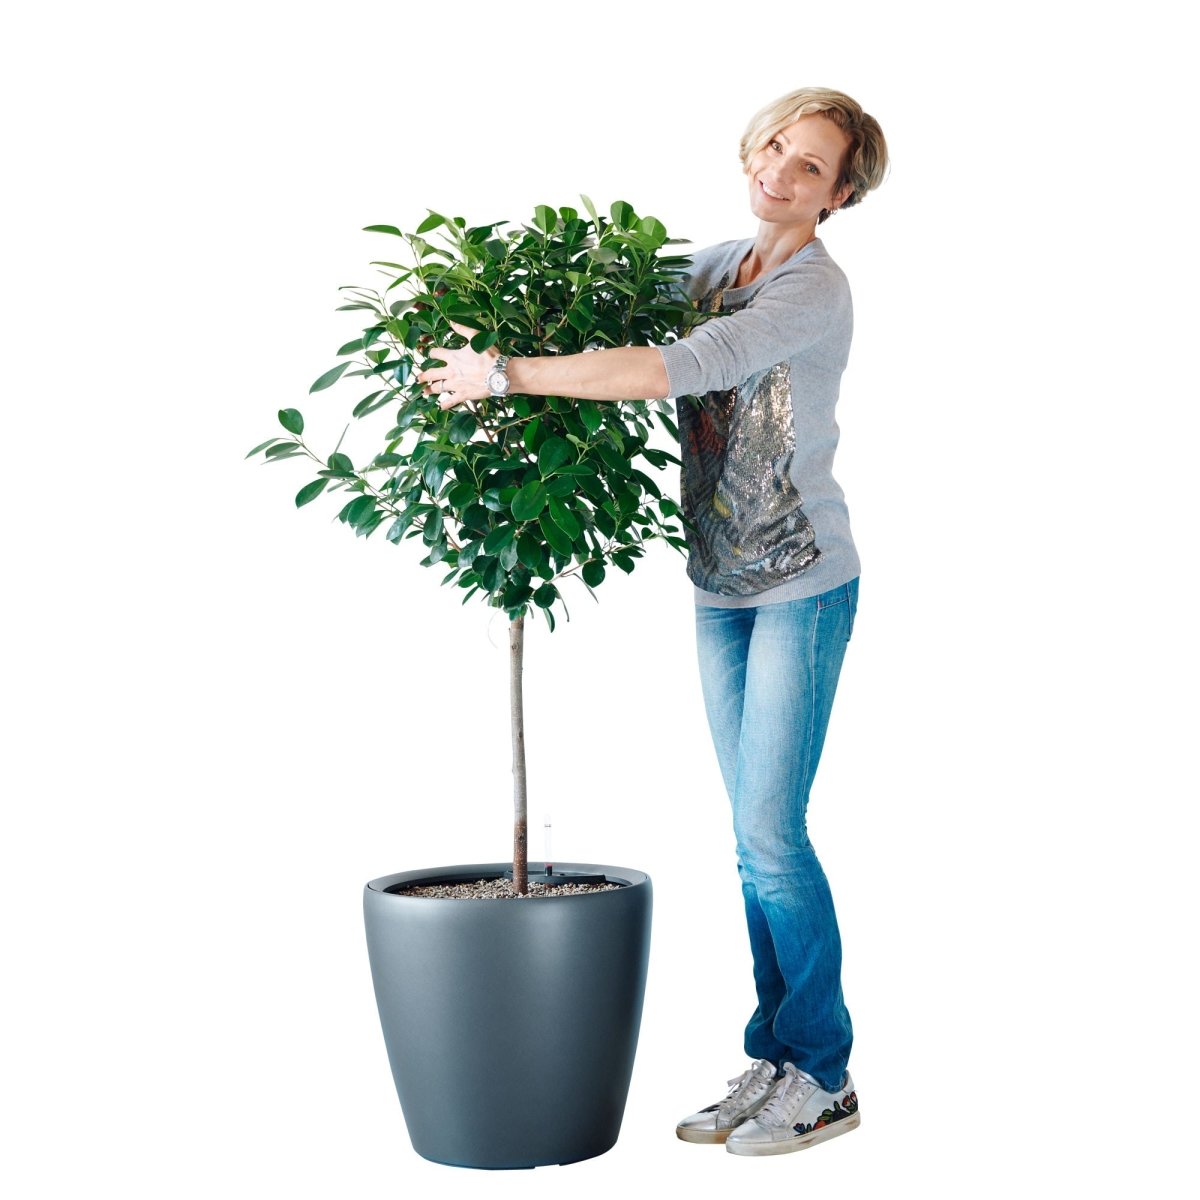 Ficus Moclame Potted In Lechuza Classico 50 Planter - Charcoal Metallic - My City Plants